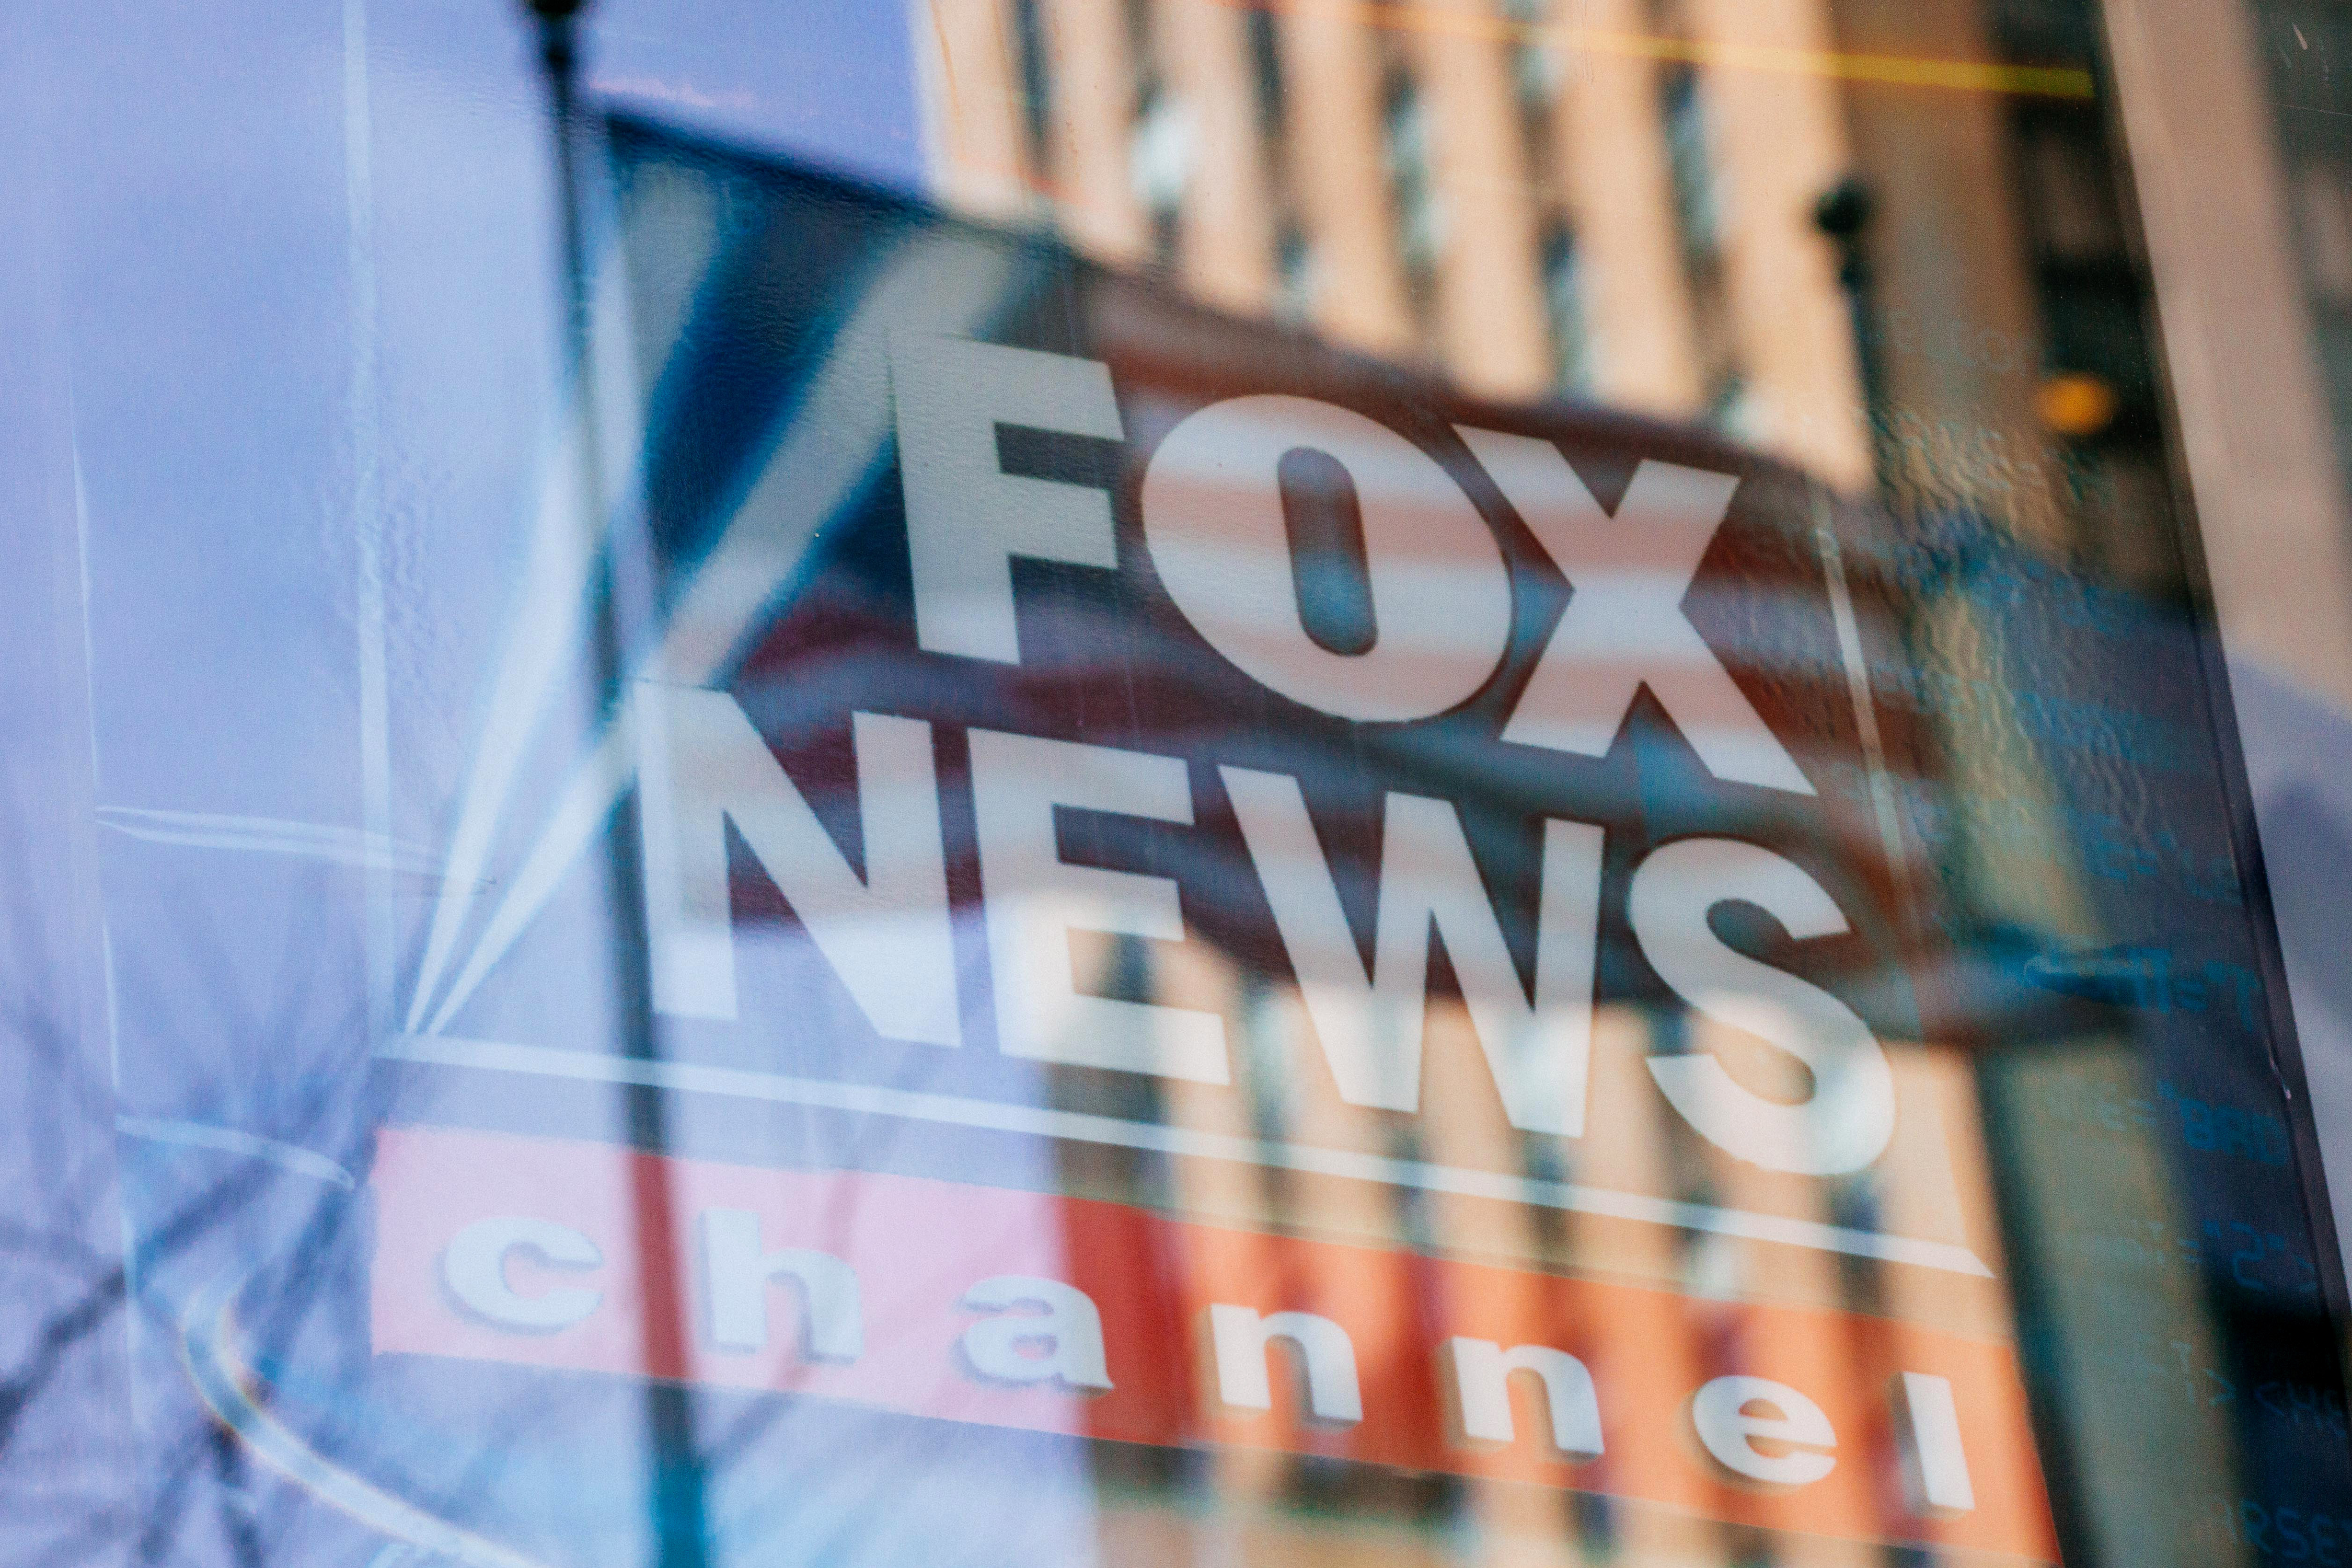 Just as their blockbuster defamation trial was set to begin, Fox News reaches a $787 million settlement with Dominion